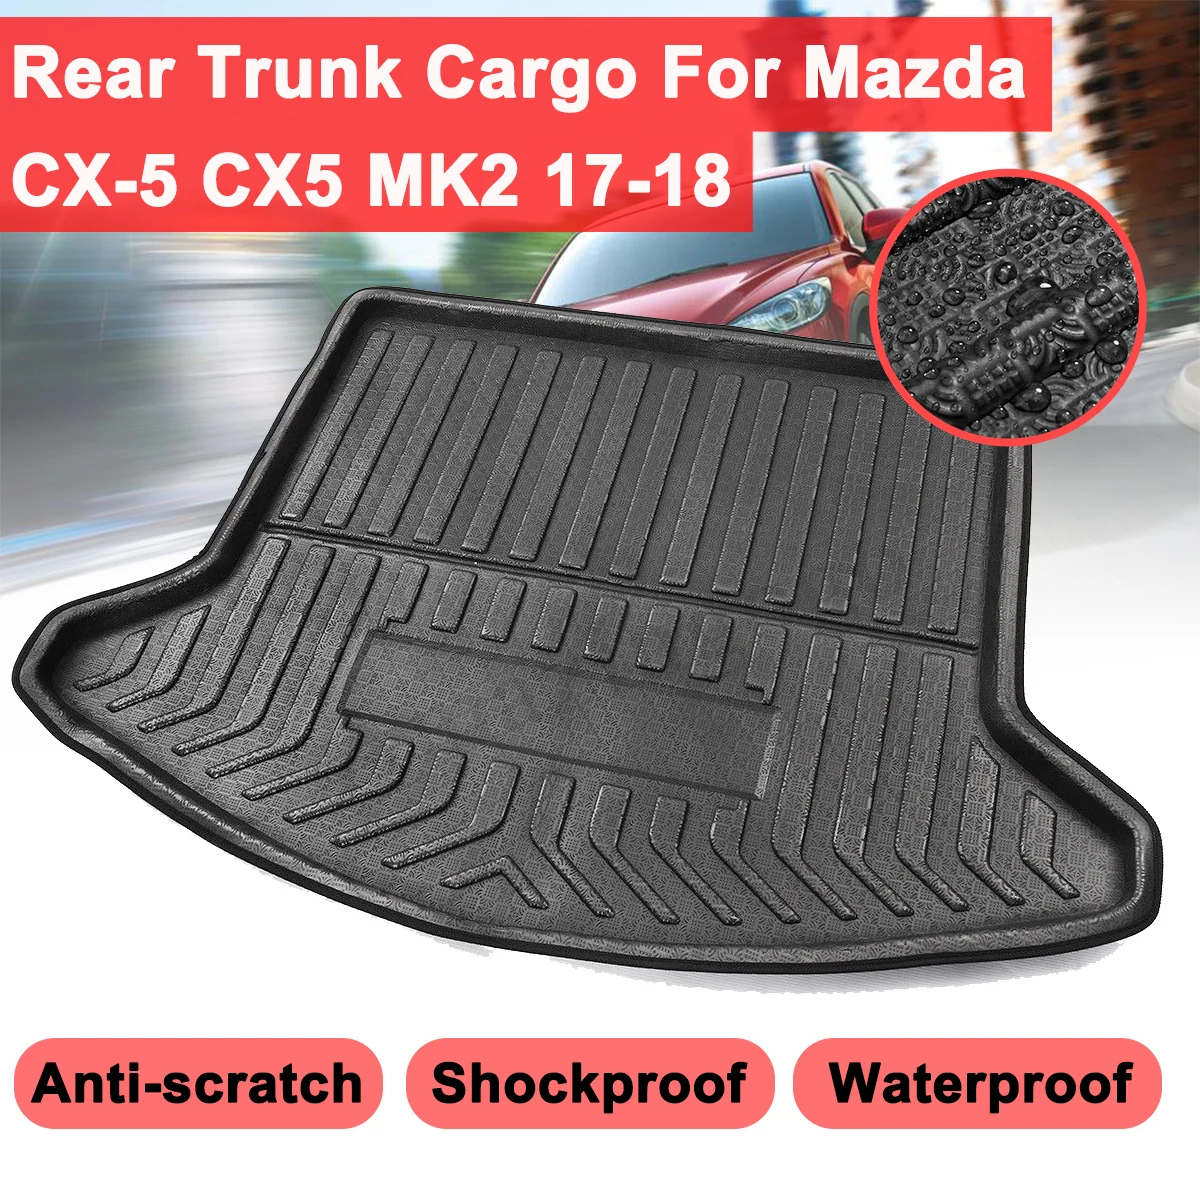 

Rear Trunk Cargo For Mazda CX-5 CX5 MK2 2017 2018 Car styling Interior Accessories Boot Liner Waterproof Mat Shockproof